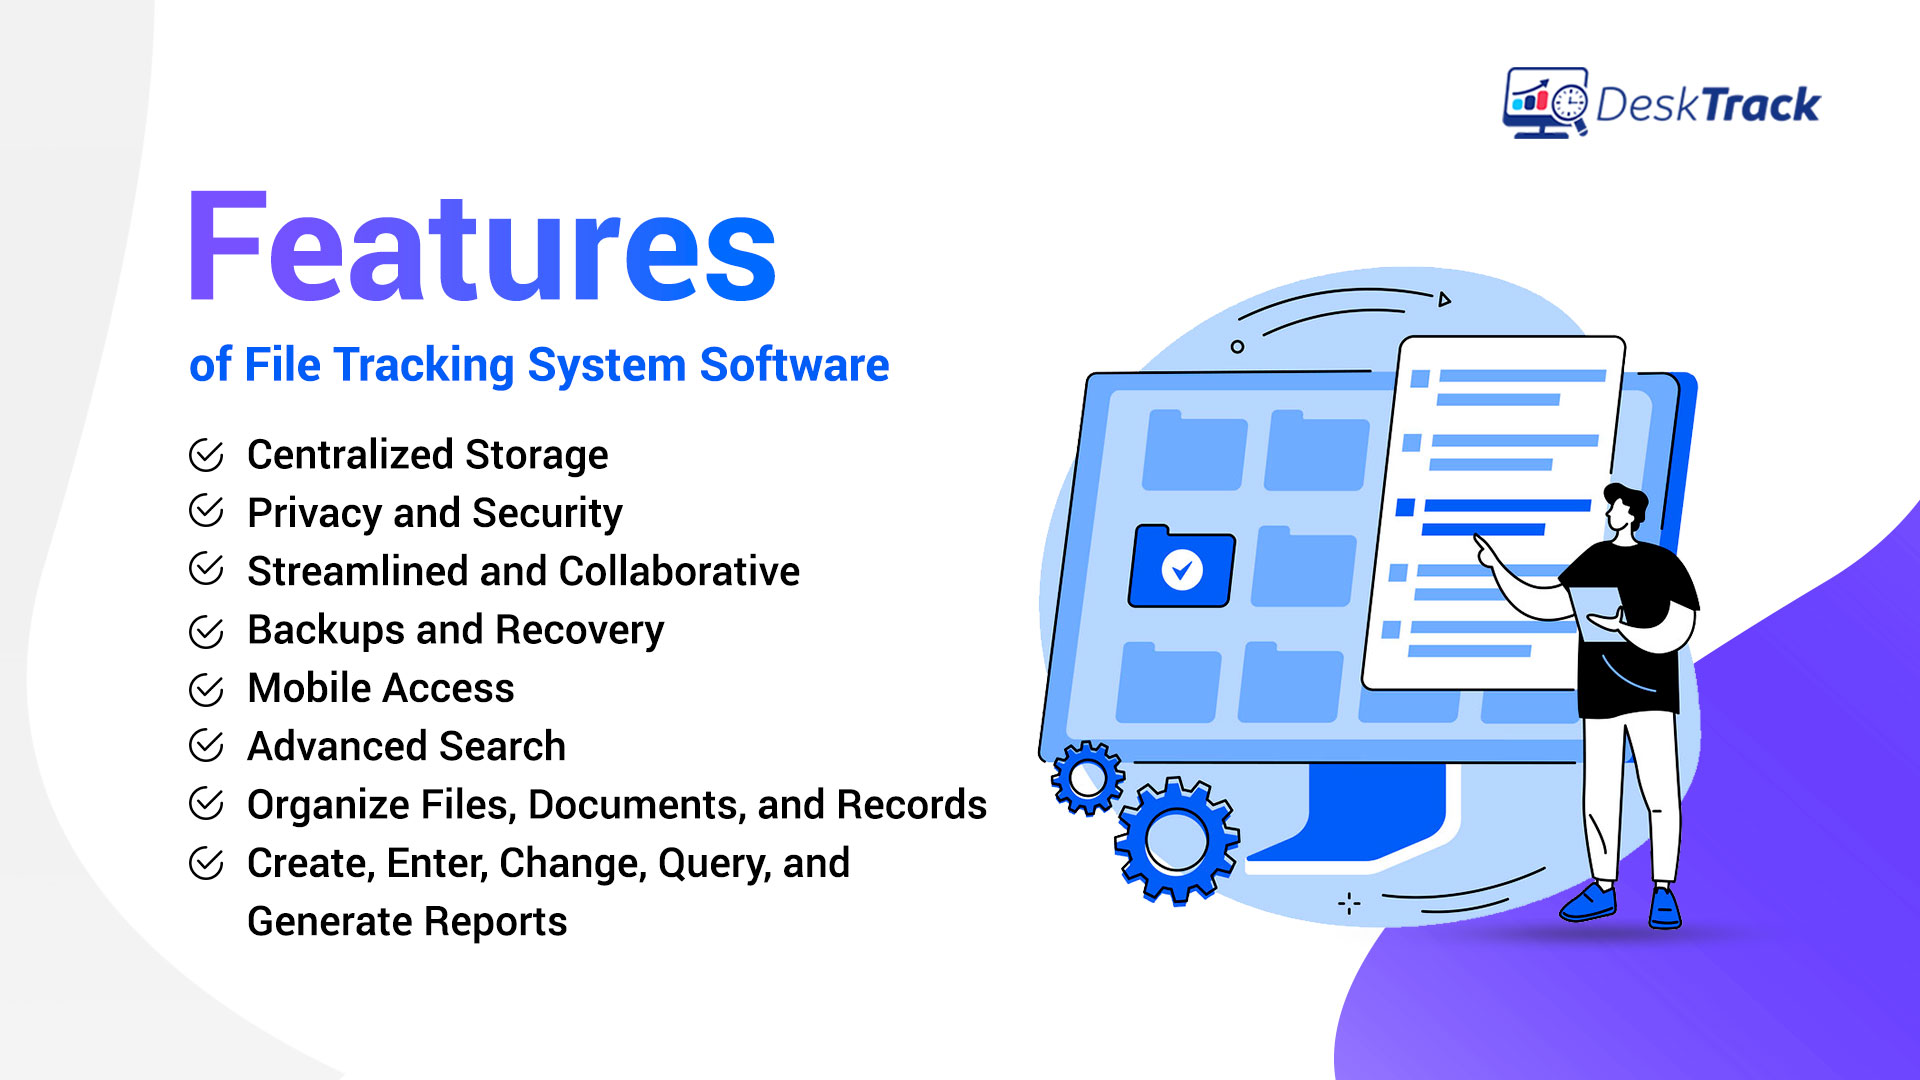 Features of File Tracking System Software